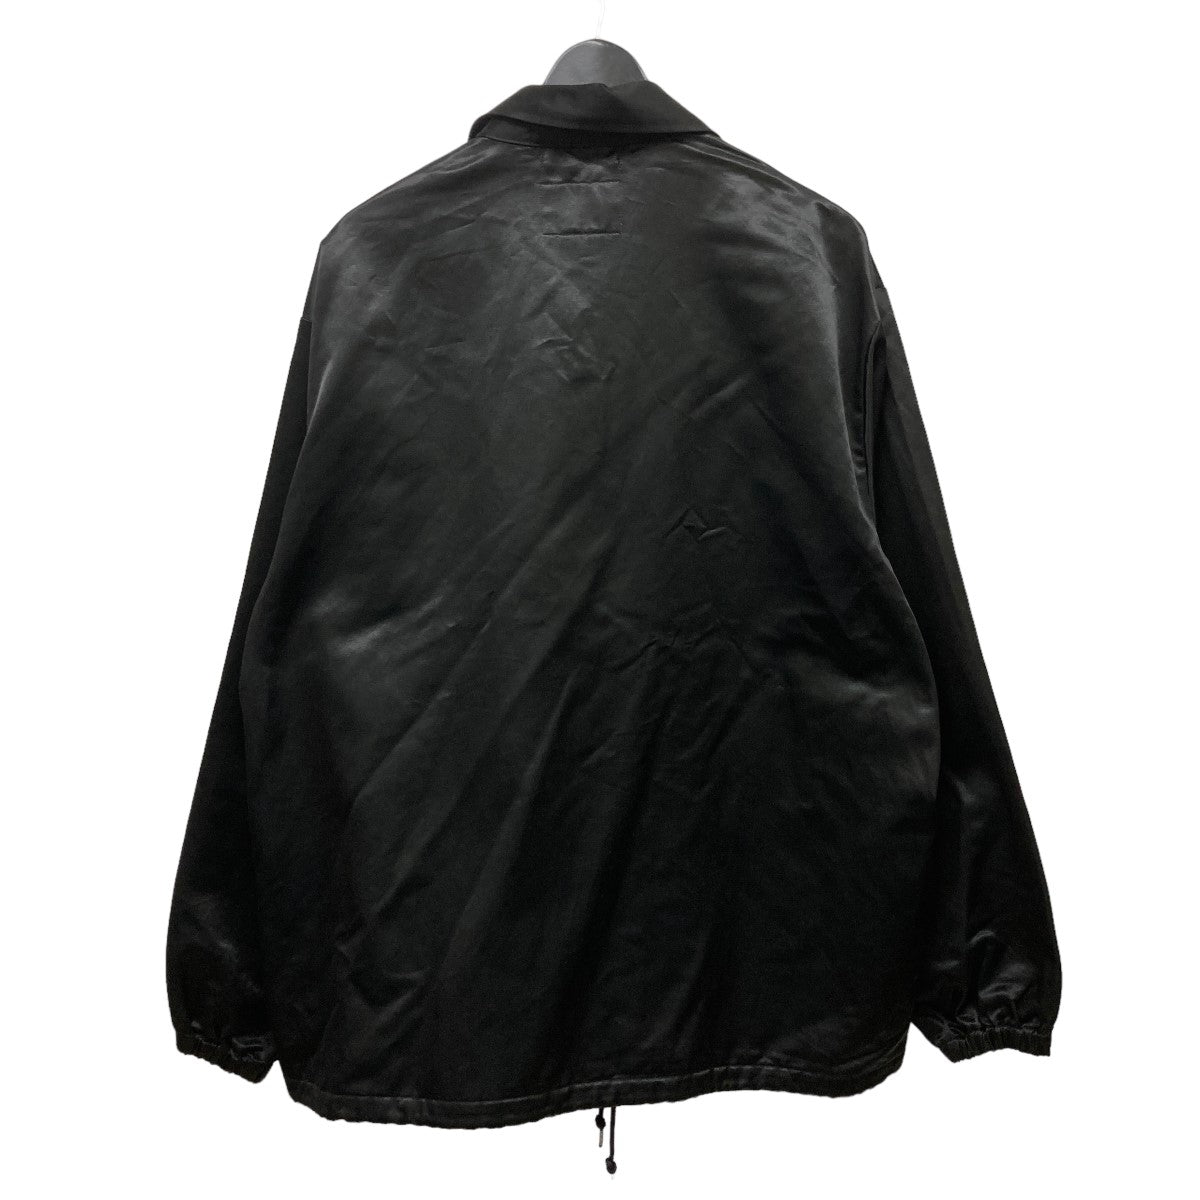 WTAPS(ダブルタップス) 24SSCHIEF JACKET CTRY． SATIN． LEAGUEロゴ 